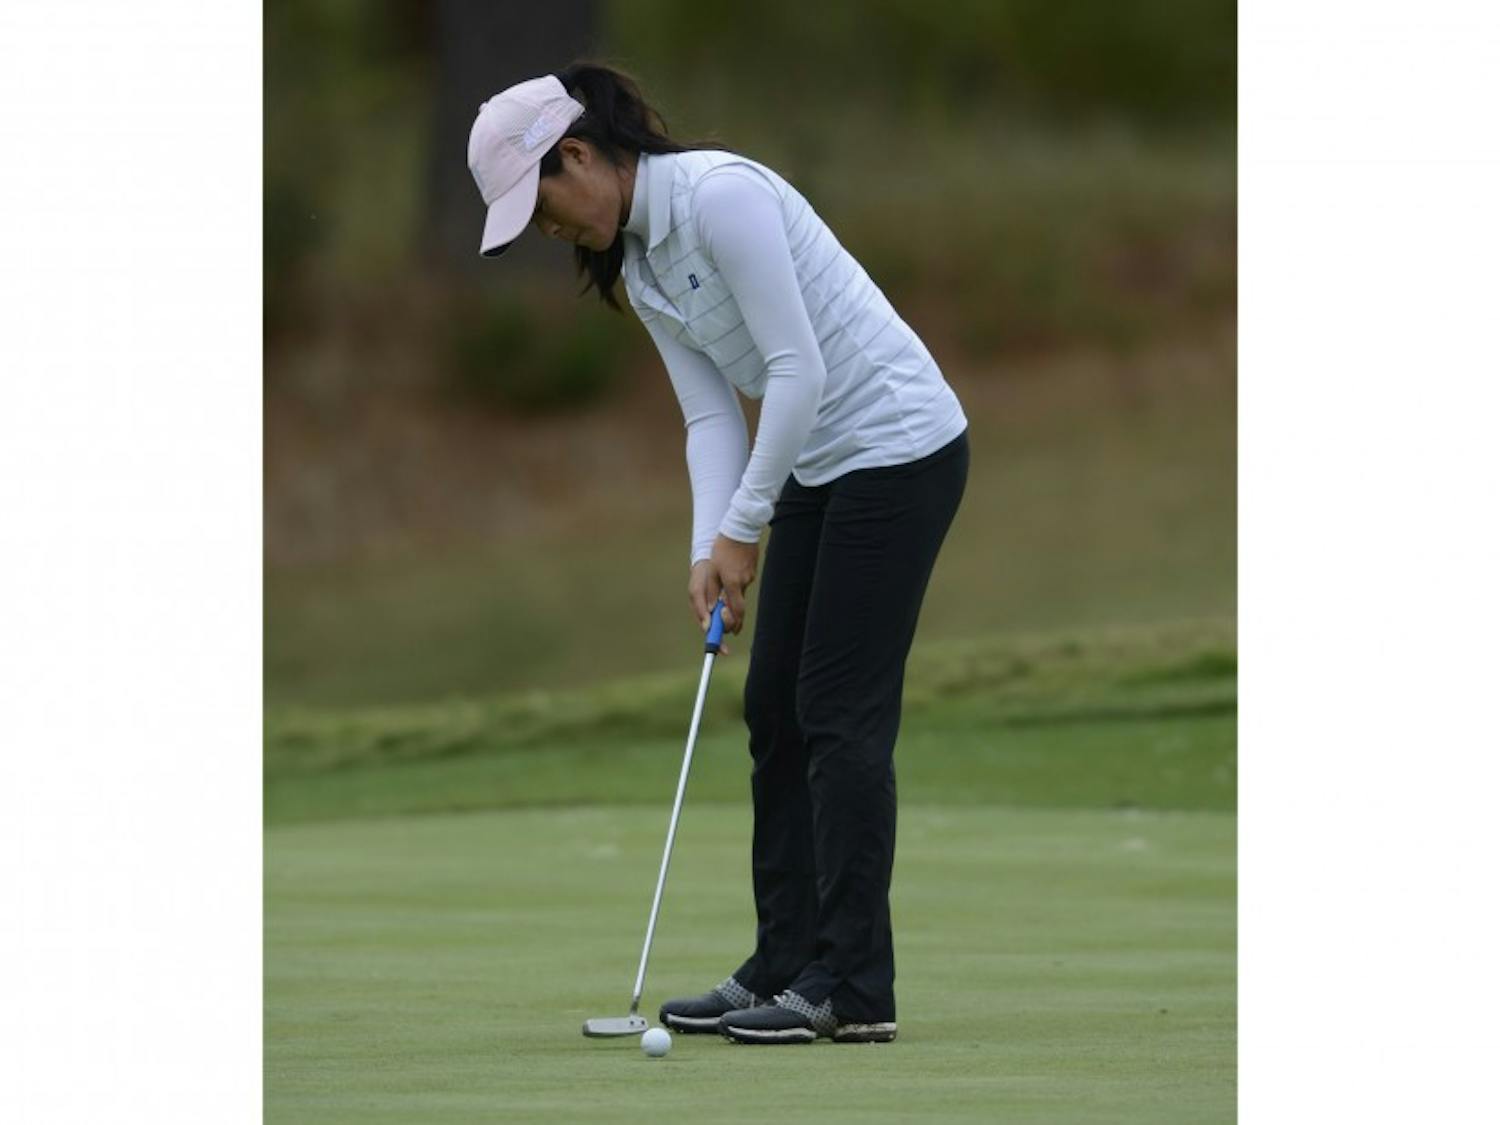 Playing her first college tournament of the season, junior Celine Boutier carded a six-under-par, good for a third-place finish.